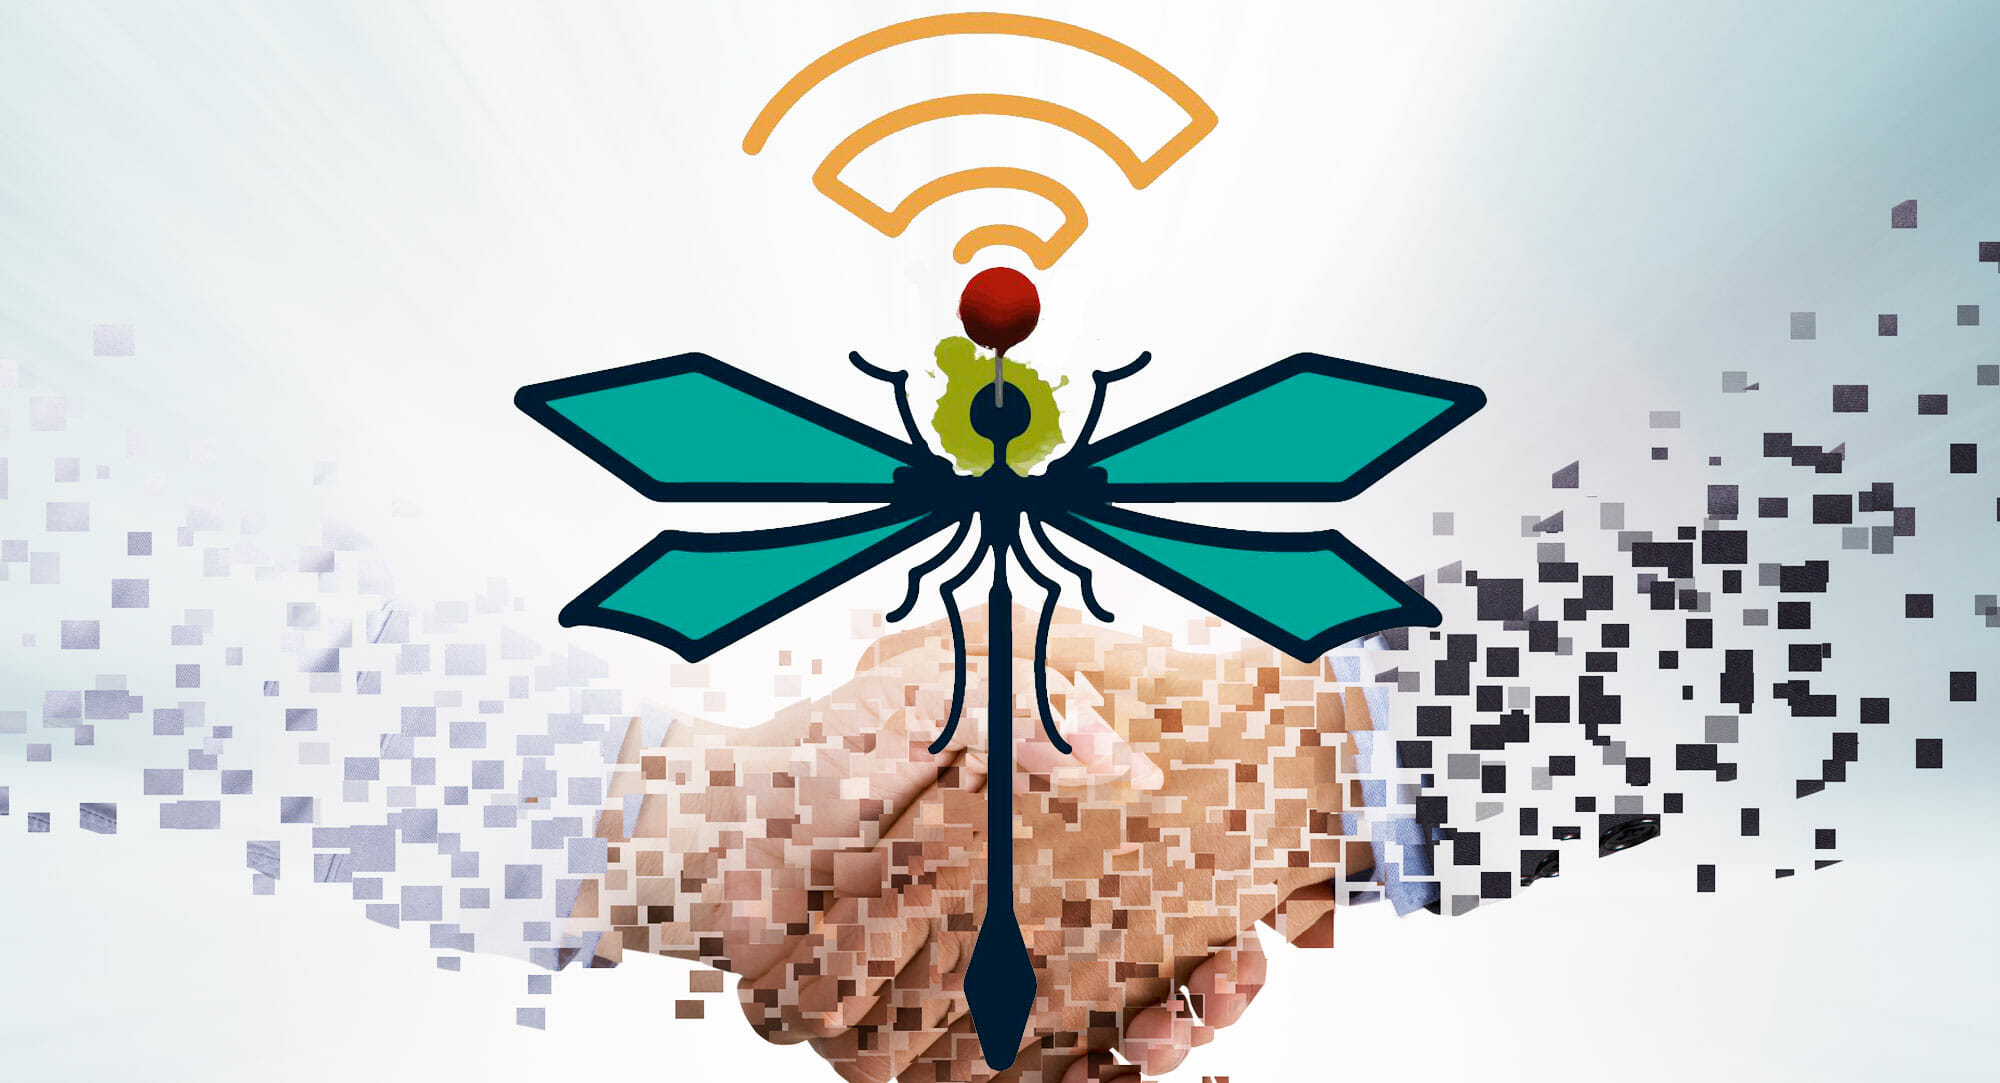 WPA3-SAE: A Dragonfly Aims to Fix Wi-Fi’s Wings